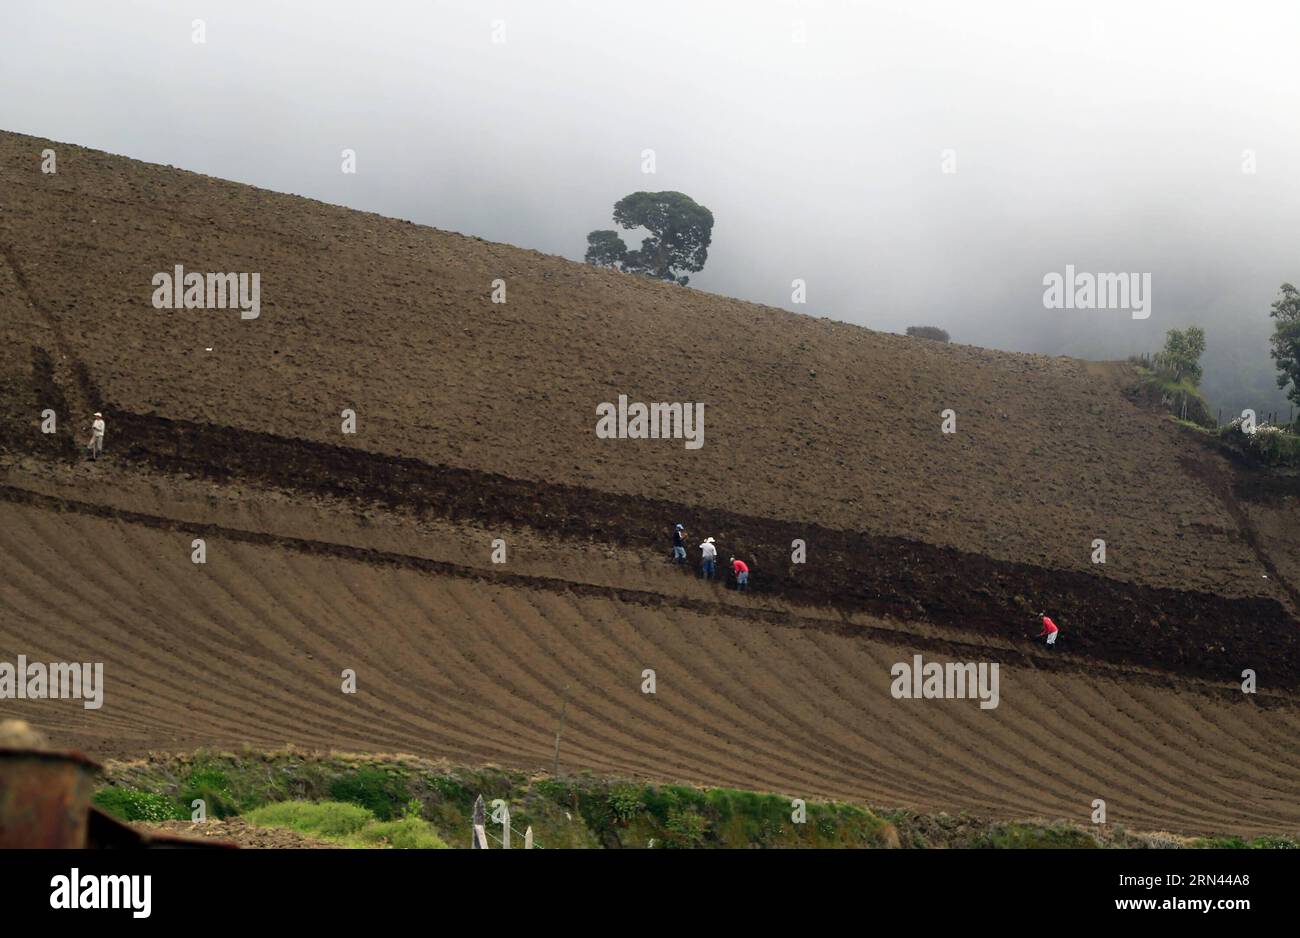 PACAYAS DE CARTAGO, May 5, 2015 -- Workers till the soil near Pacayas de Cartago, Costa Rica, on May 5, 2015. The Turrialba volcano has been active since last October, with continuous exhalations of gas and ashes, which has affected cattlemen and farmers in the solpes of the volcano. Kent Gilbert) (zjy) COSTA RICA-PACAYAS DE CARTAGO-VOLCANO e KENTxGILBERT PUBLICATIONxNOTxINxCHN   de Cartago May 5 2015 Workers Till The Soil Near  de Cartago Costa Rica ON May 5 2015 The Turrialba Volcano has been Active Since Load October With continuous  of Gas and ASHES Which has Affected Cattlemen and Farmers Stock Photo